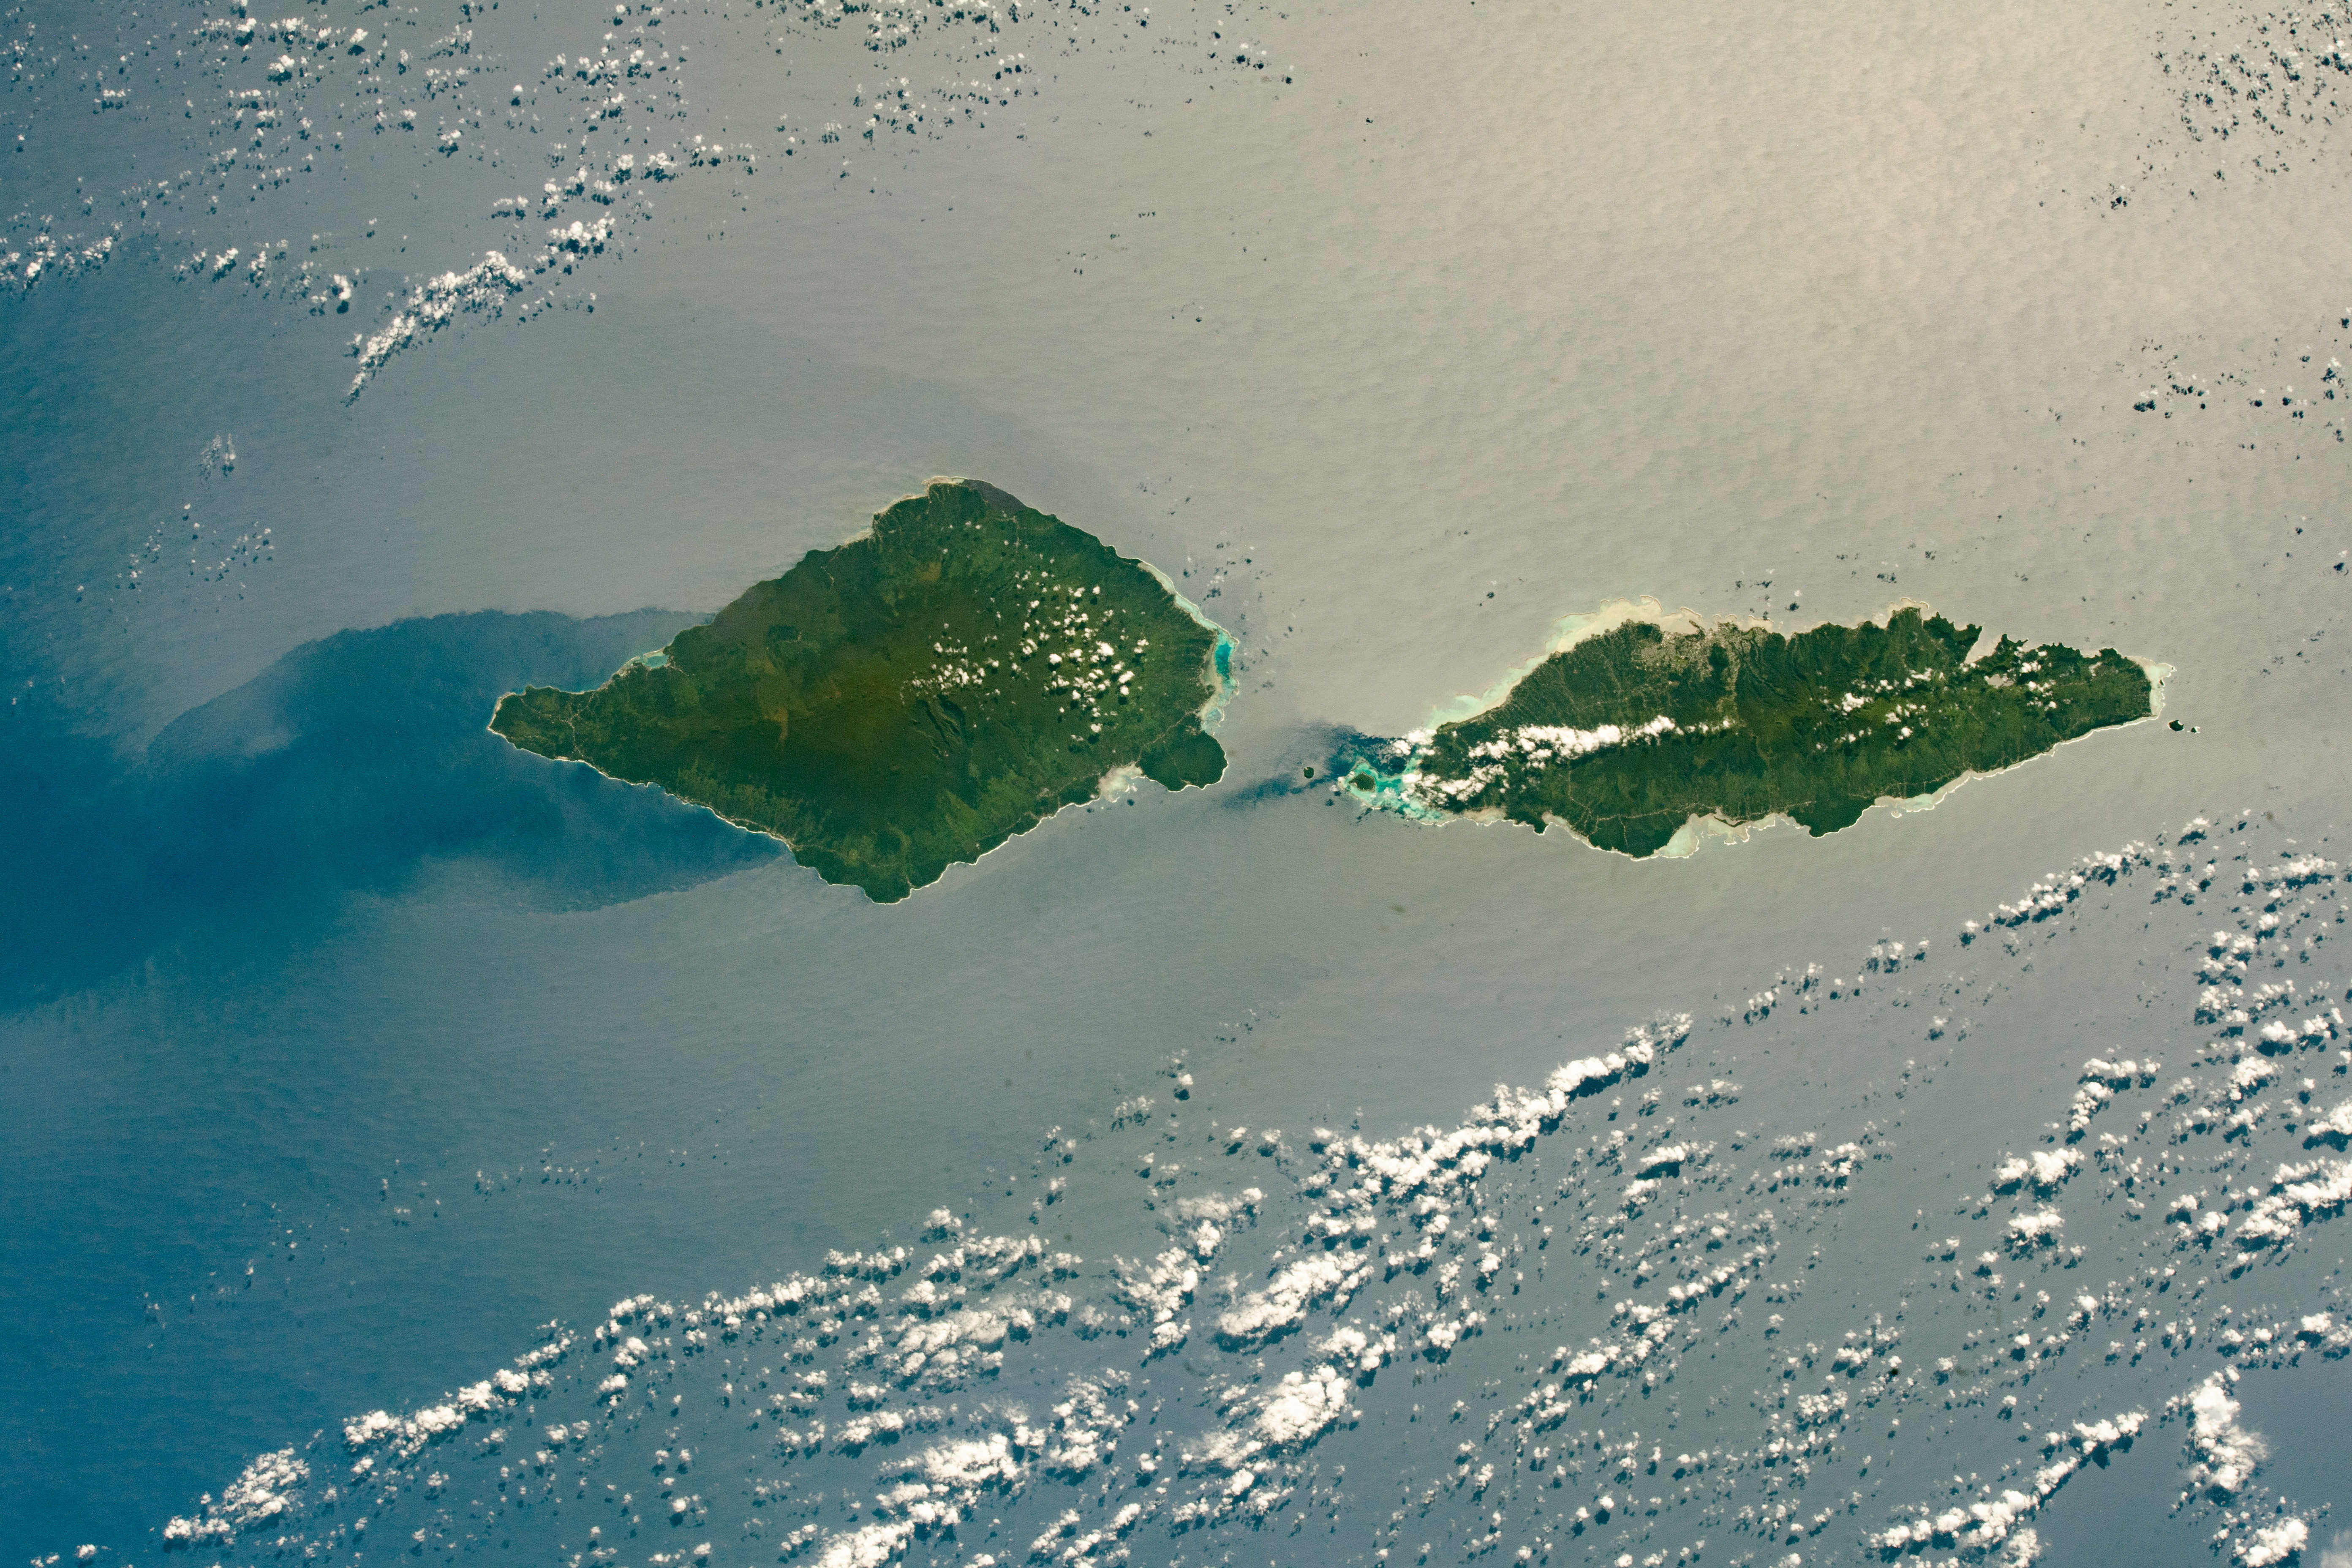 Two large islands